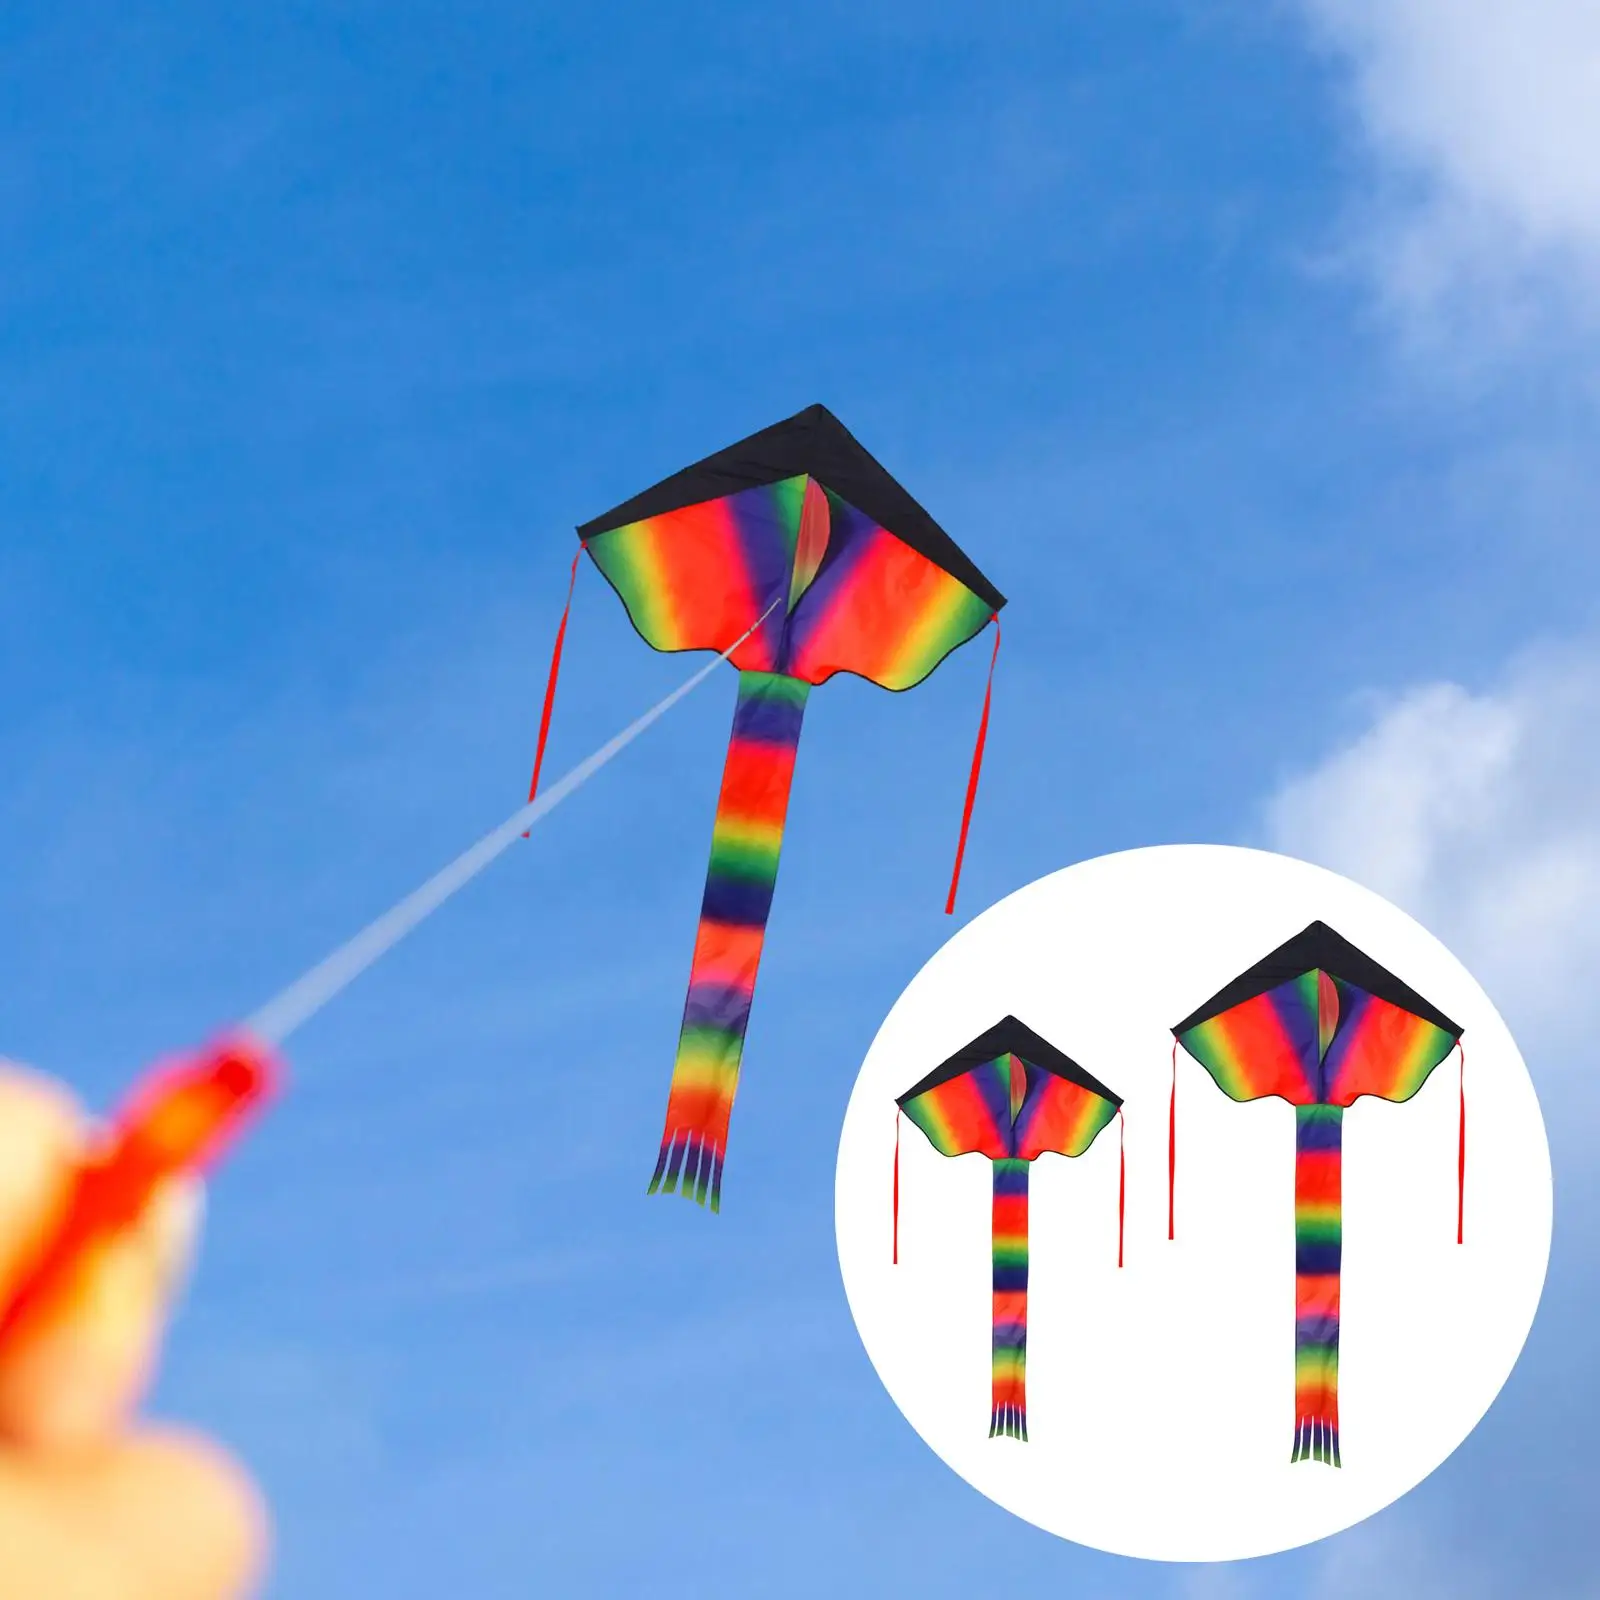 Giant Delta Kites Fly Kite Rainbow Huge 1 Width Triangle Kite with Tail Long Tail for Outdoor Toy Teenagers Beginner Kids Adults